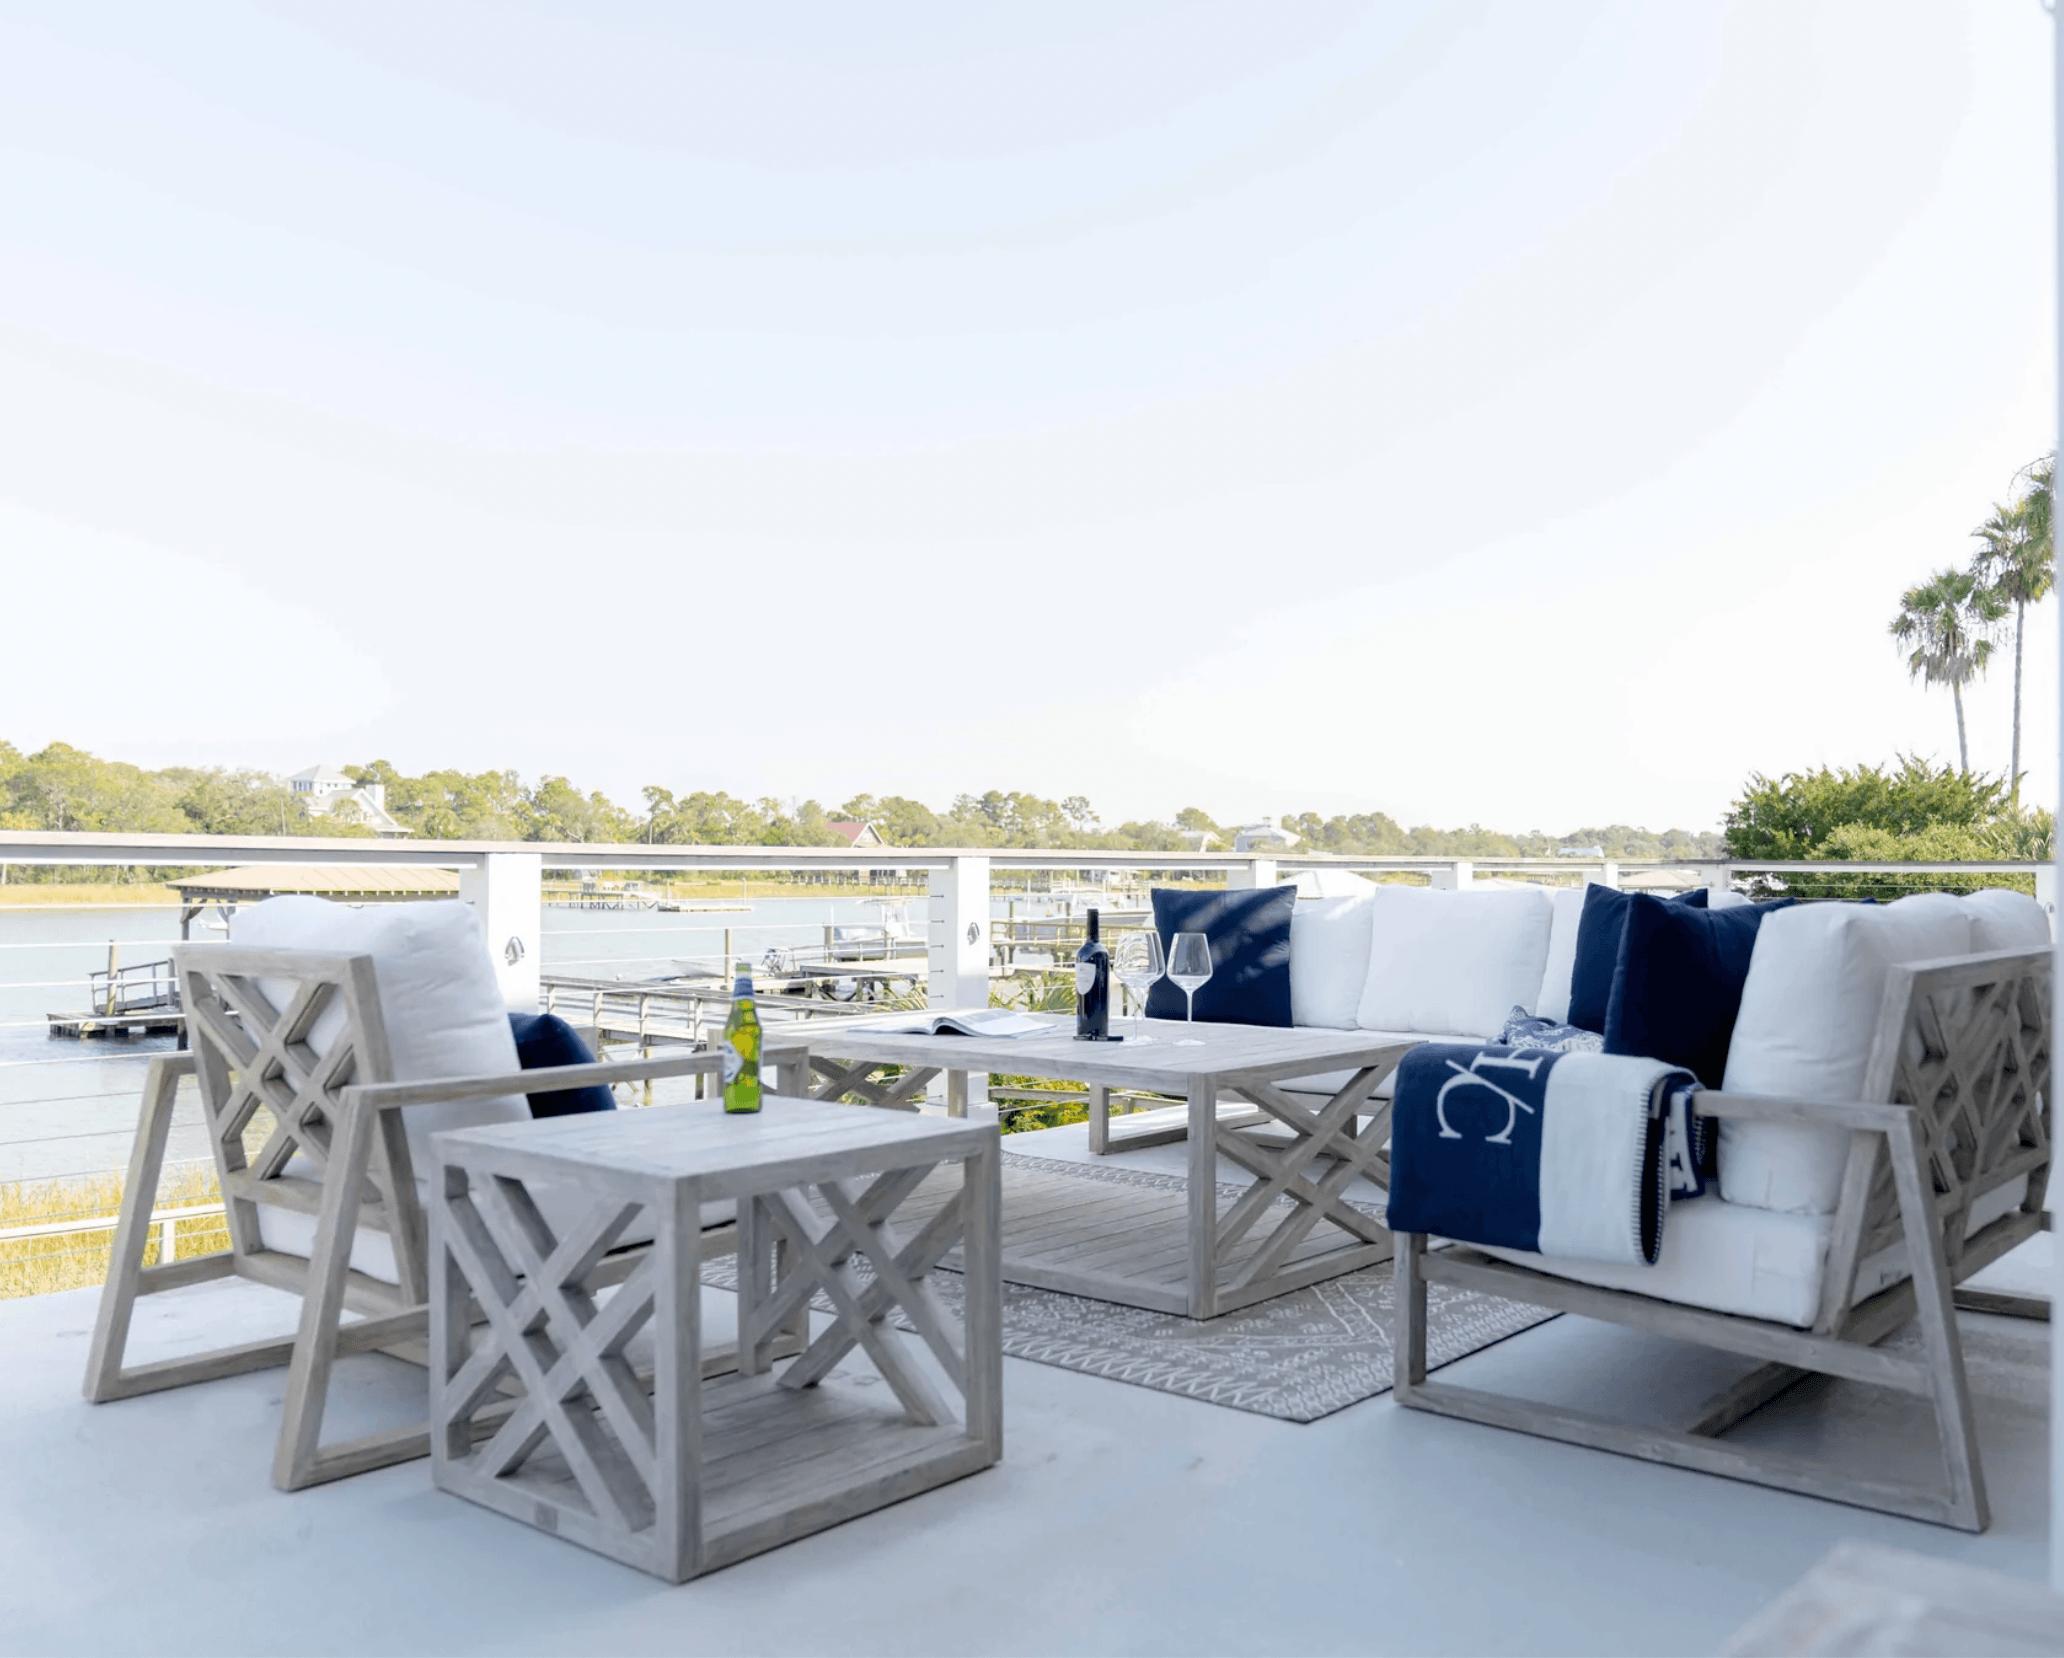 Best Modern Outdoor Seating Set For Four in Weathered Gray Teak Wood